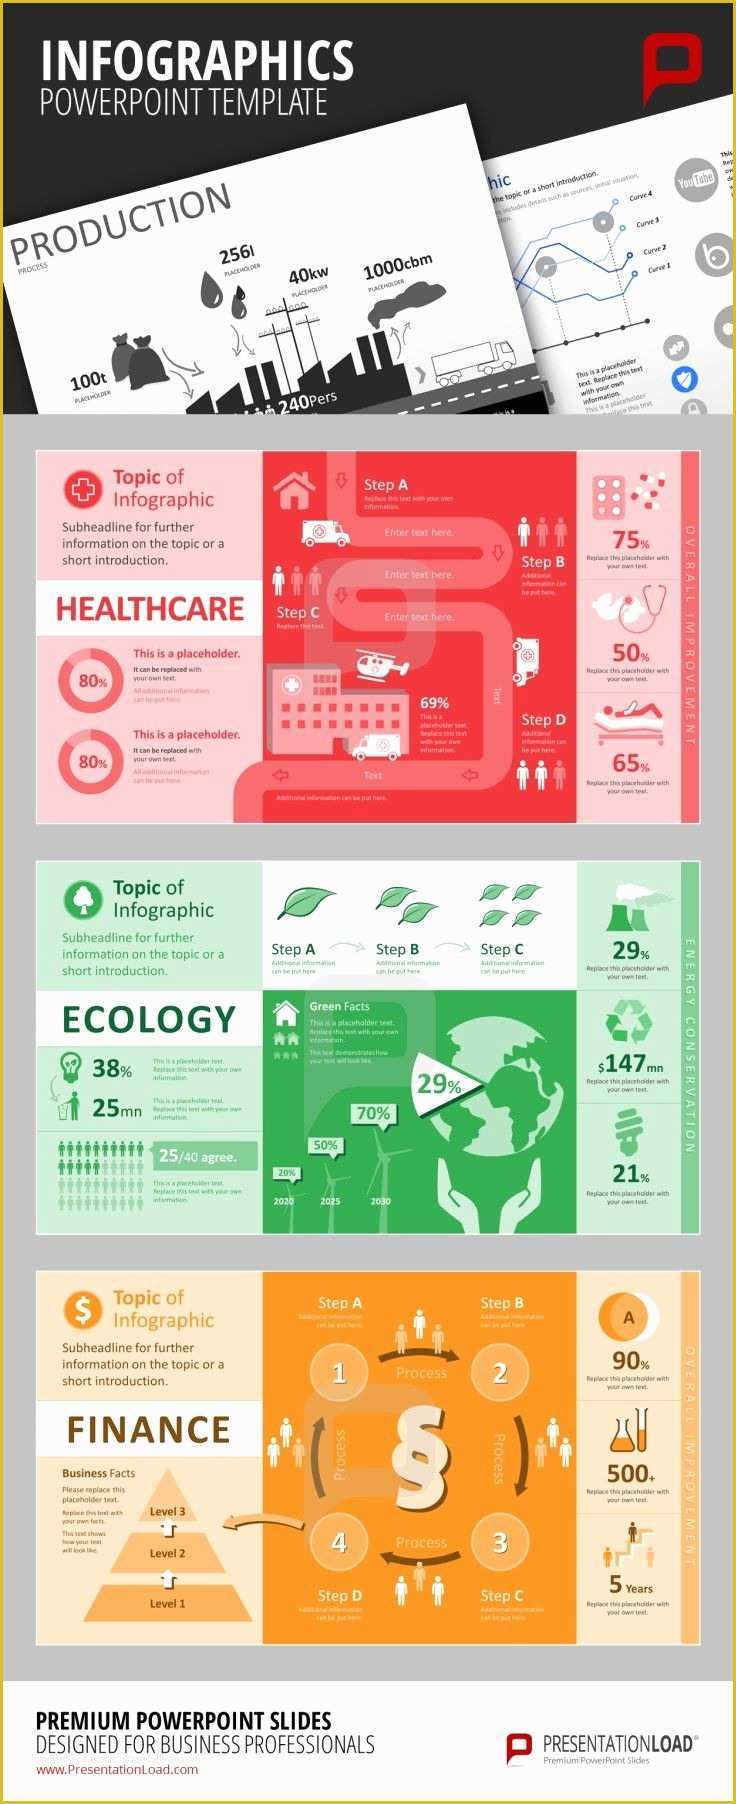 Free Infographic Templates for Students Of 92 Best Images About Infographics Powerpoint Templates